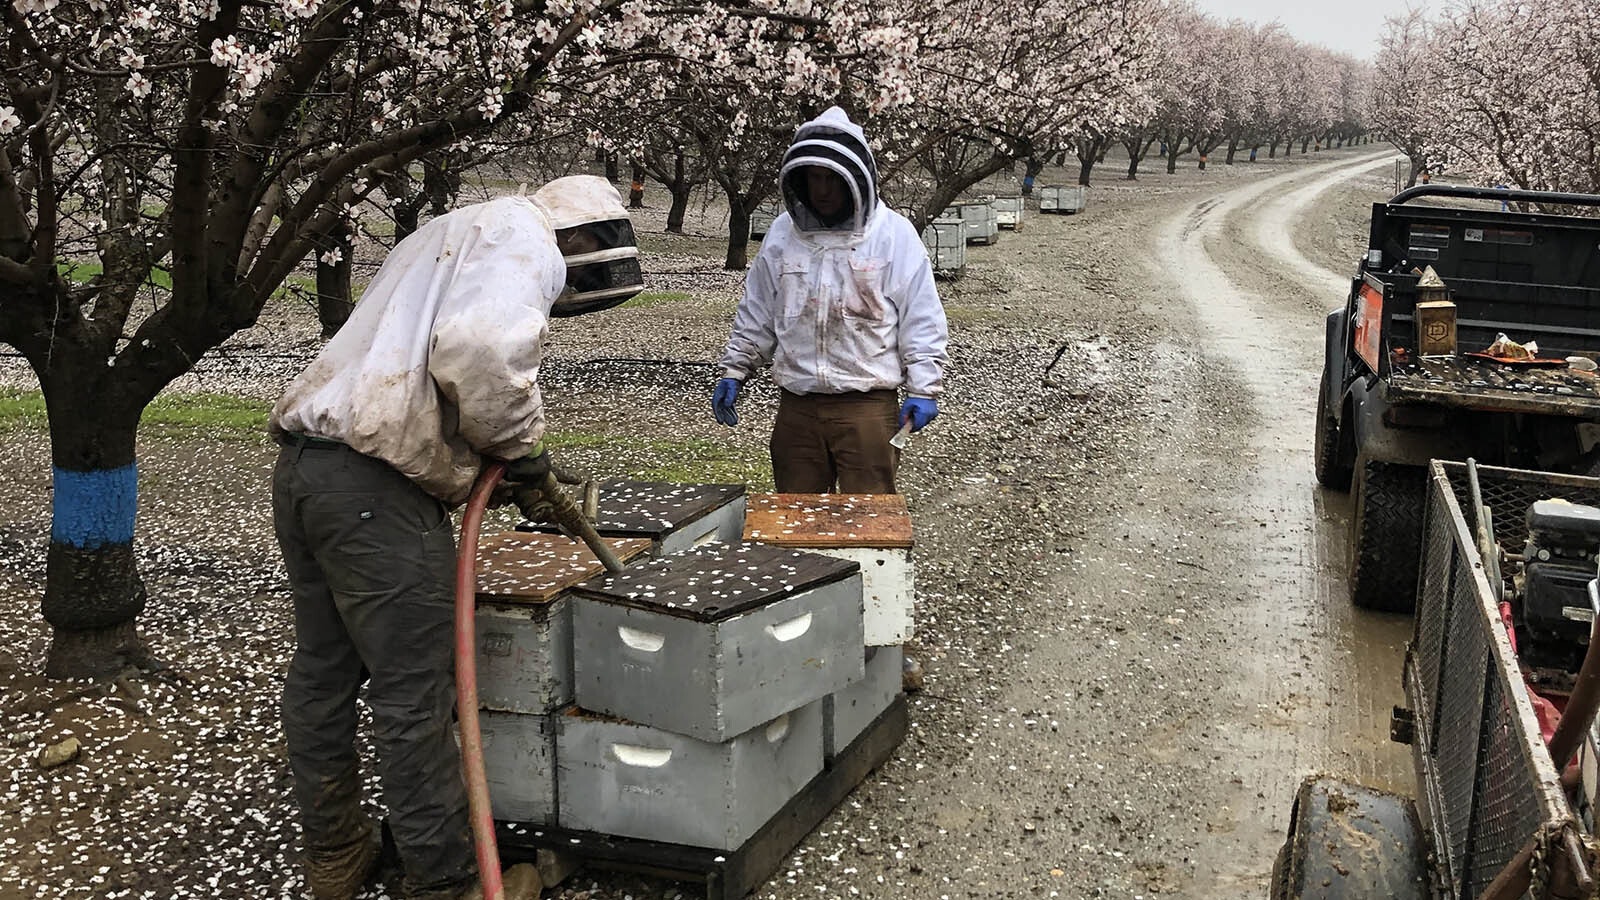 Bryant Honey Inc. of Worland sends thousands of beehives to California to pollinate almond groves. But they must be wary of California bee theft rings.